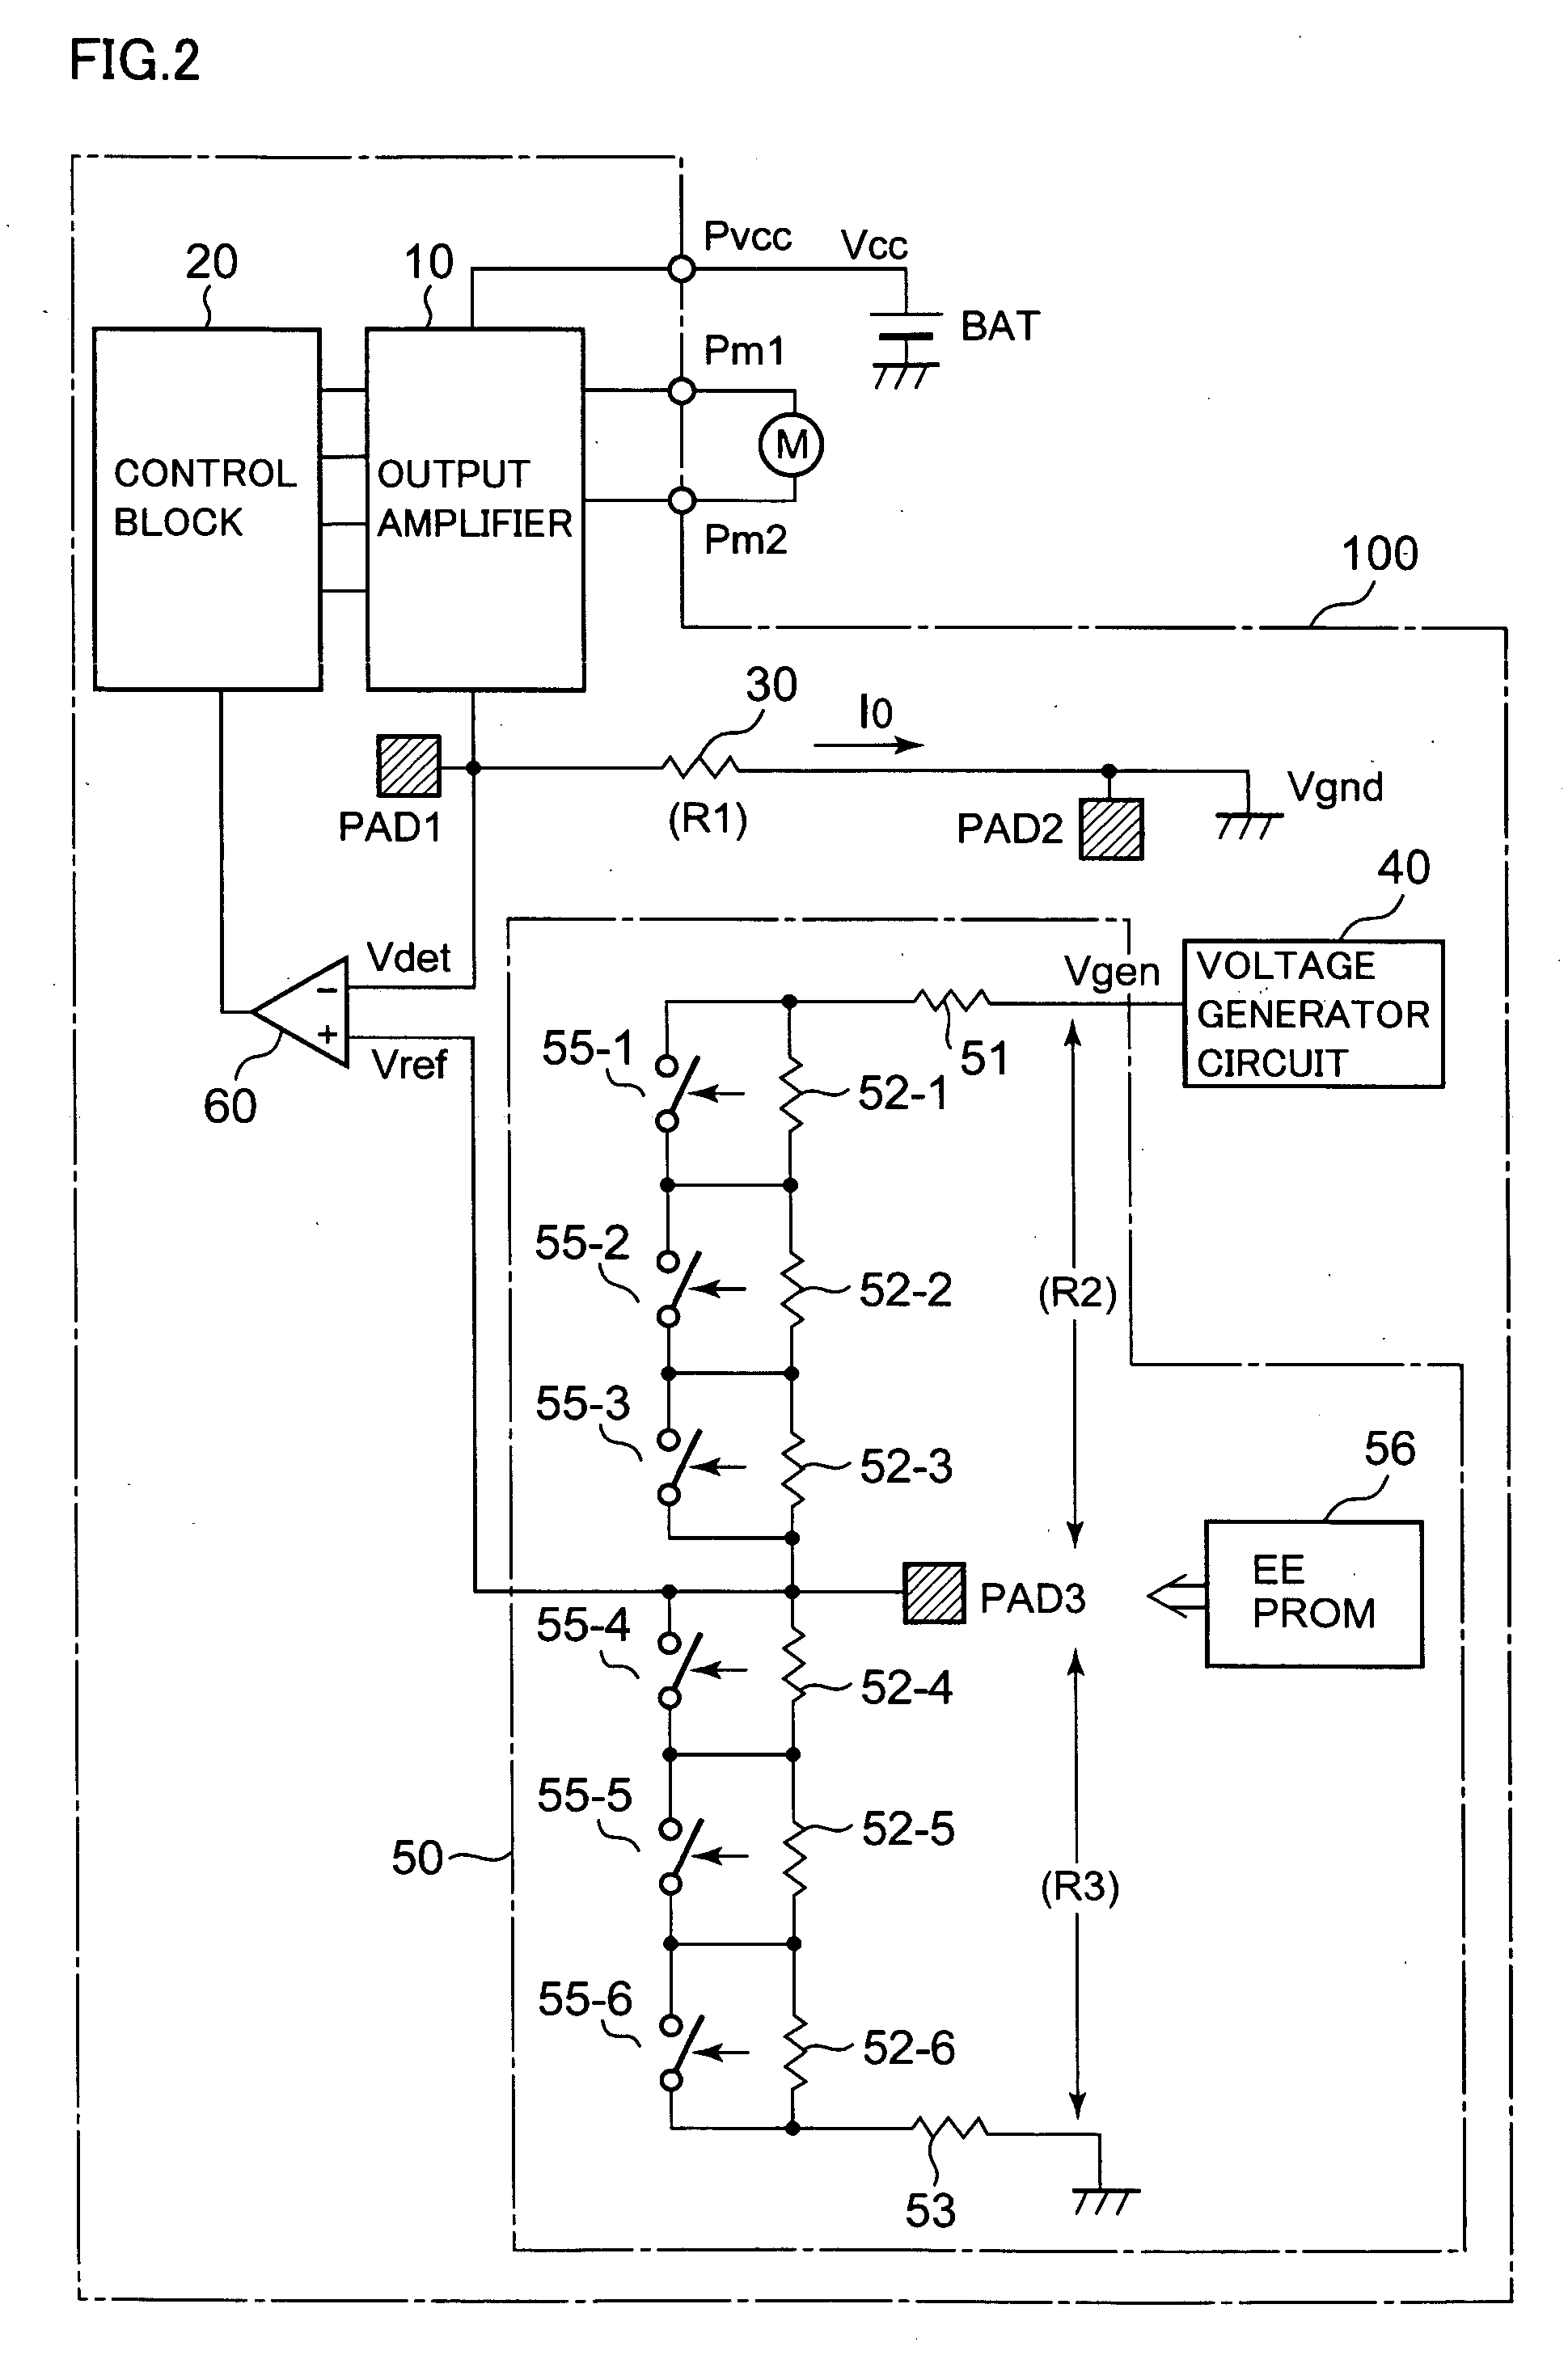 Load-driving semiconductor device that detects current flowing through load by resistor